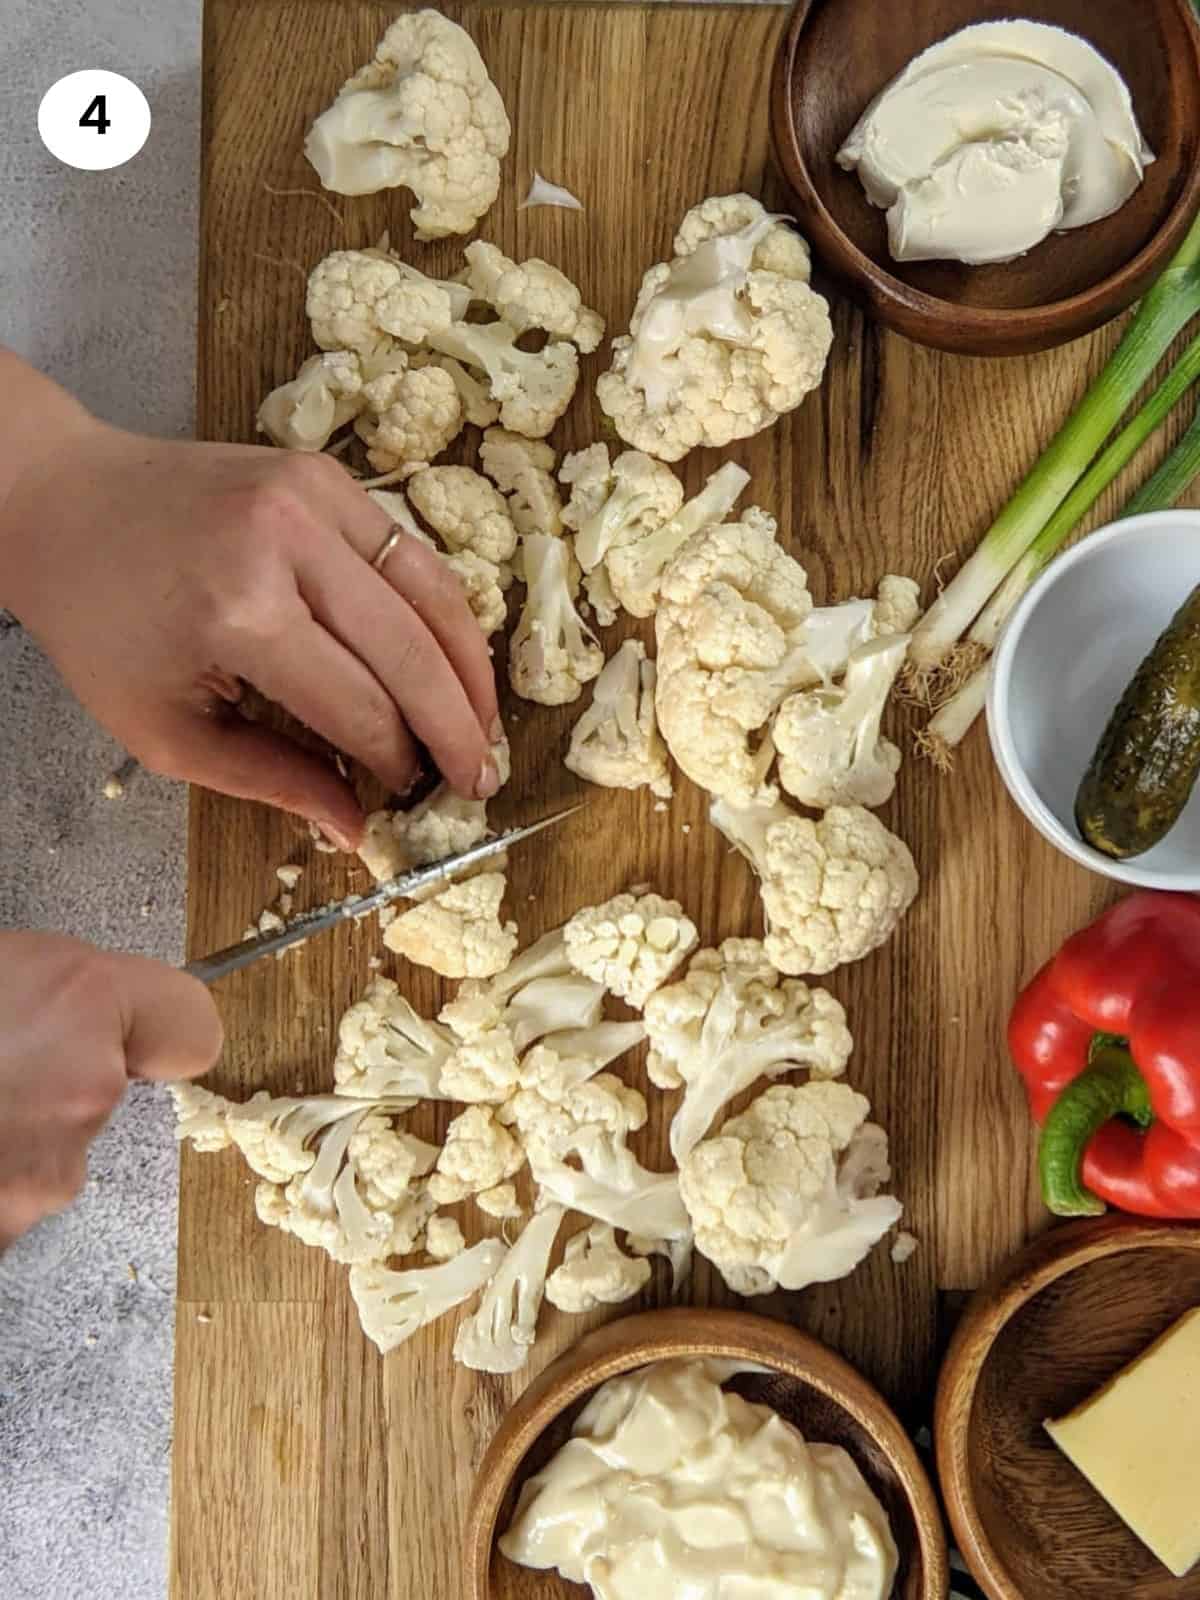 Cutting the cauliflower into small florets.